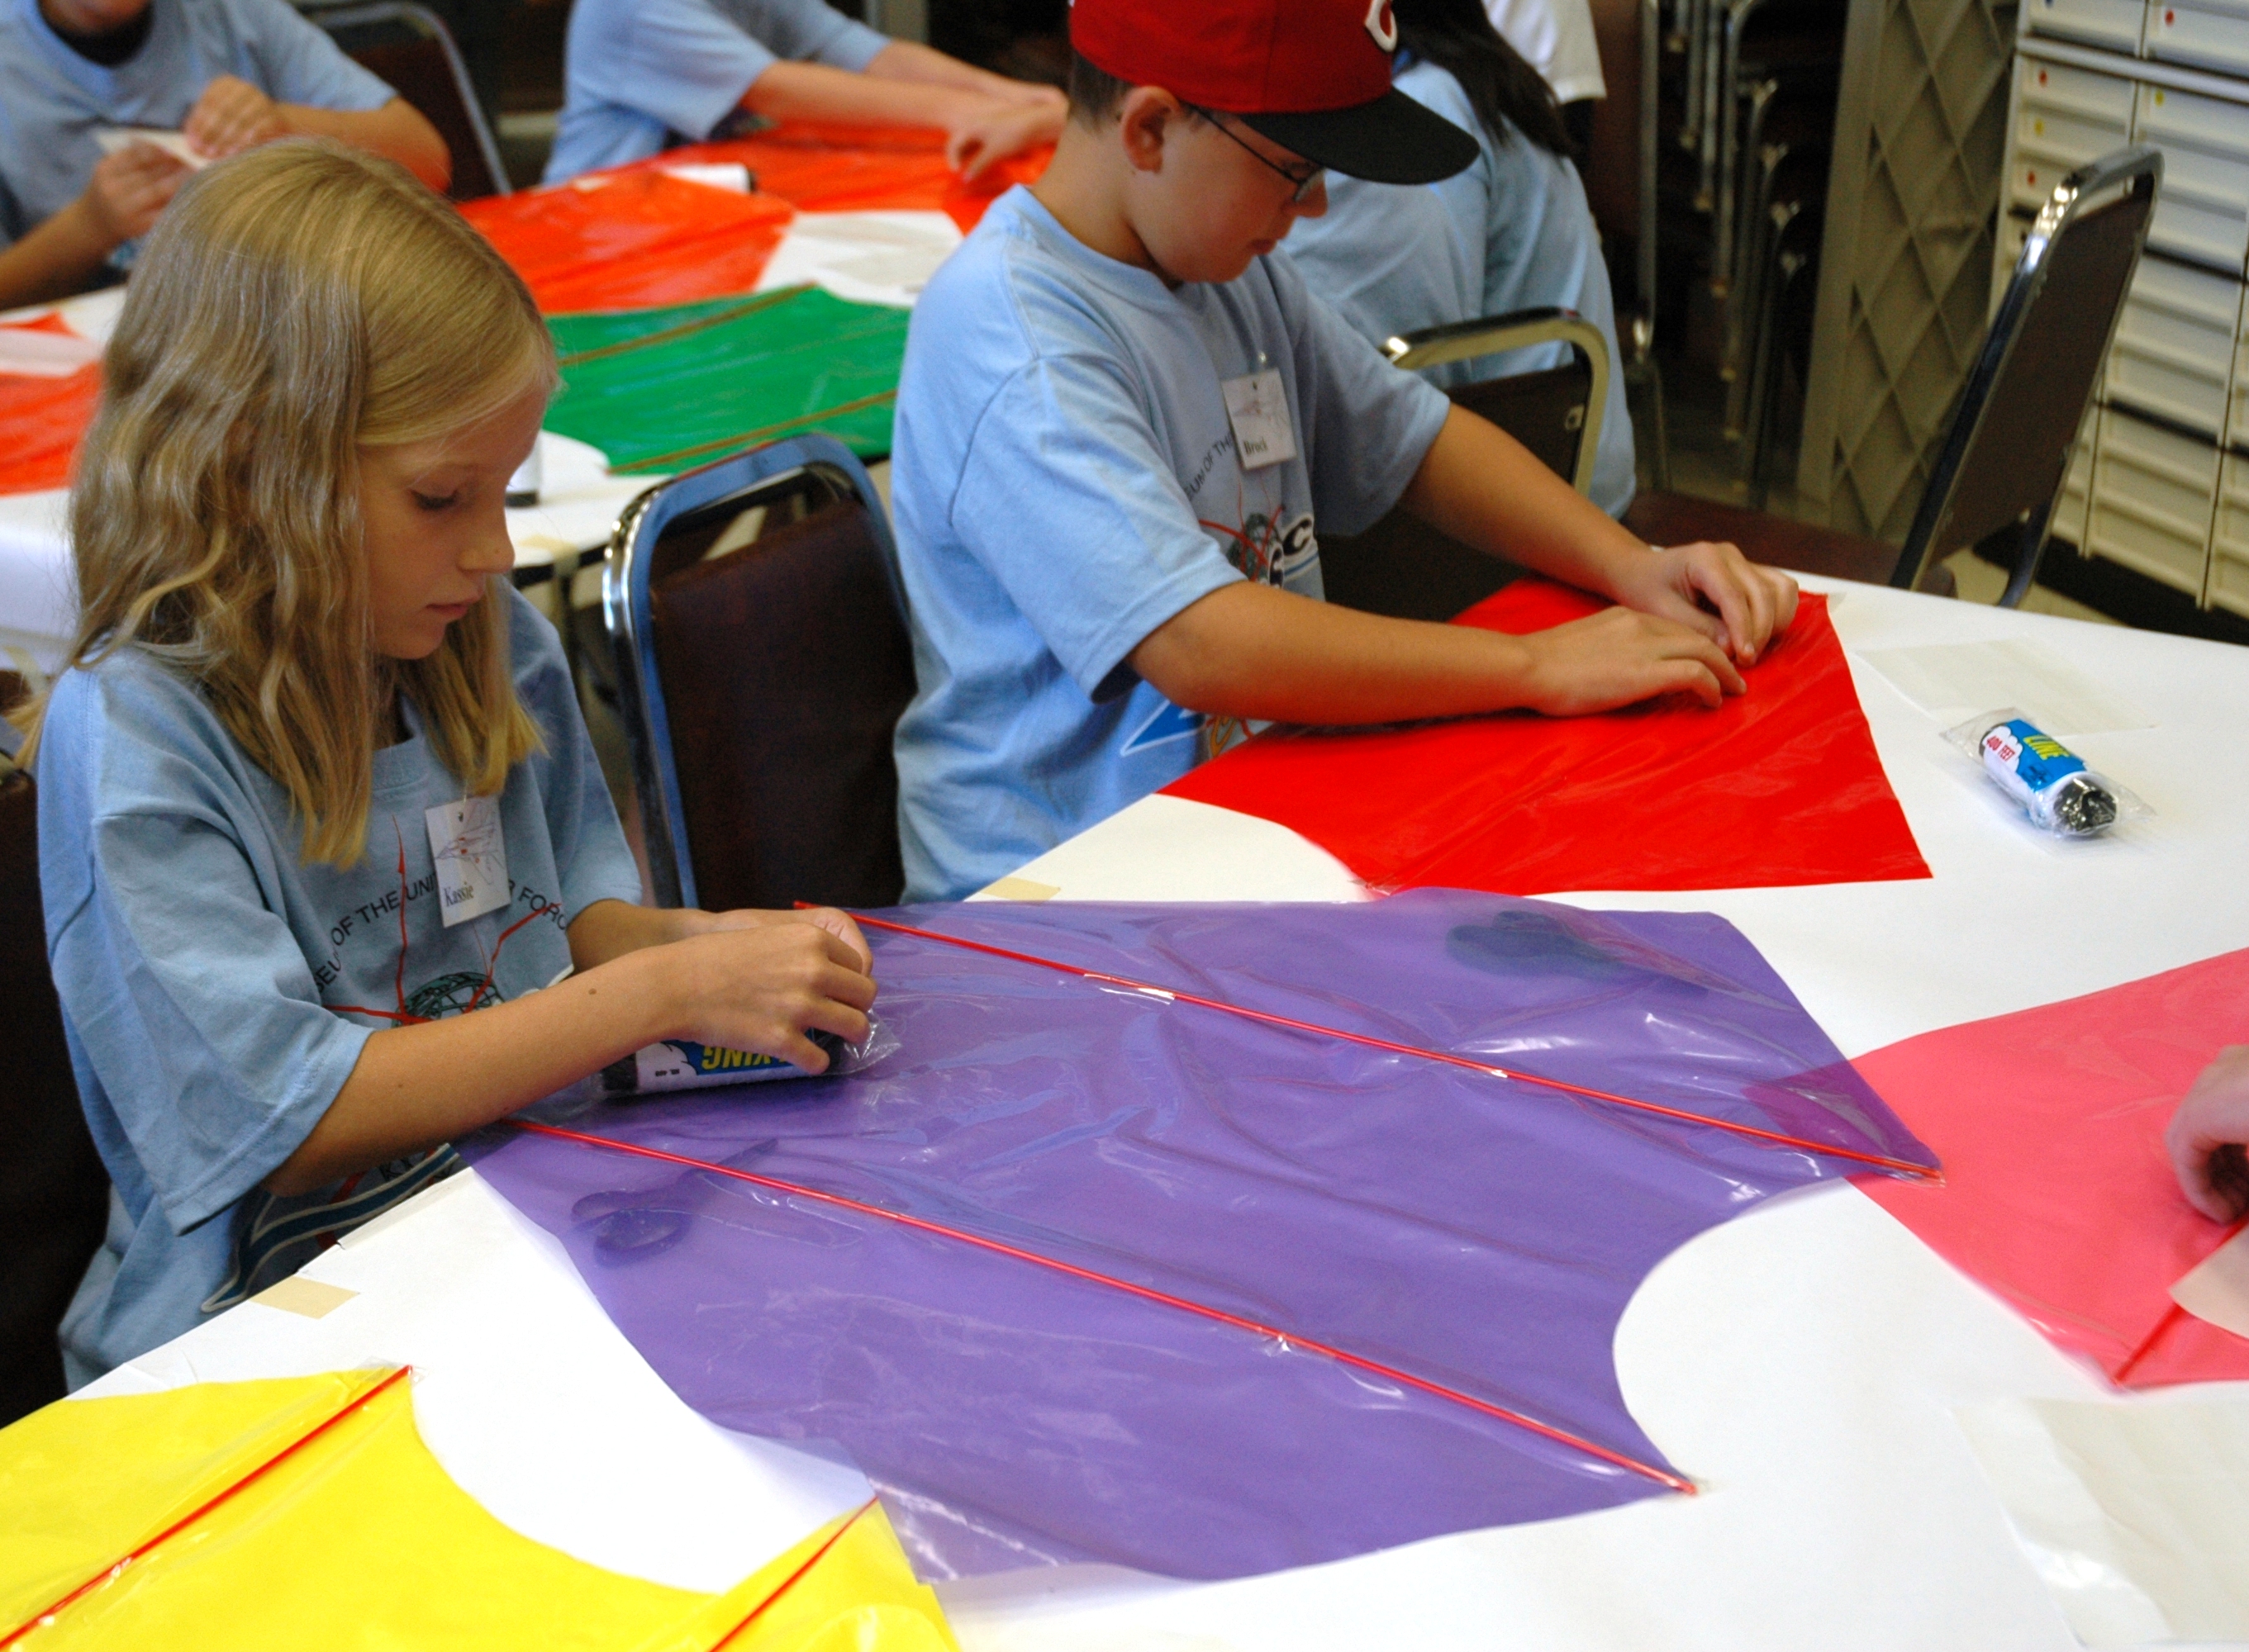 Students seated at table designing a sled kite.